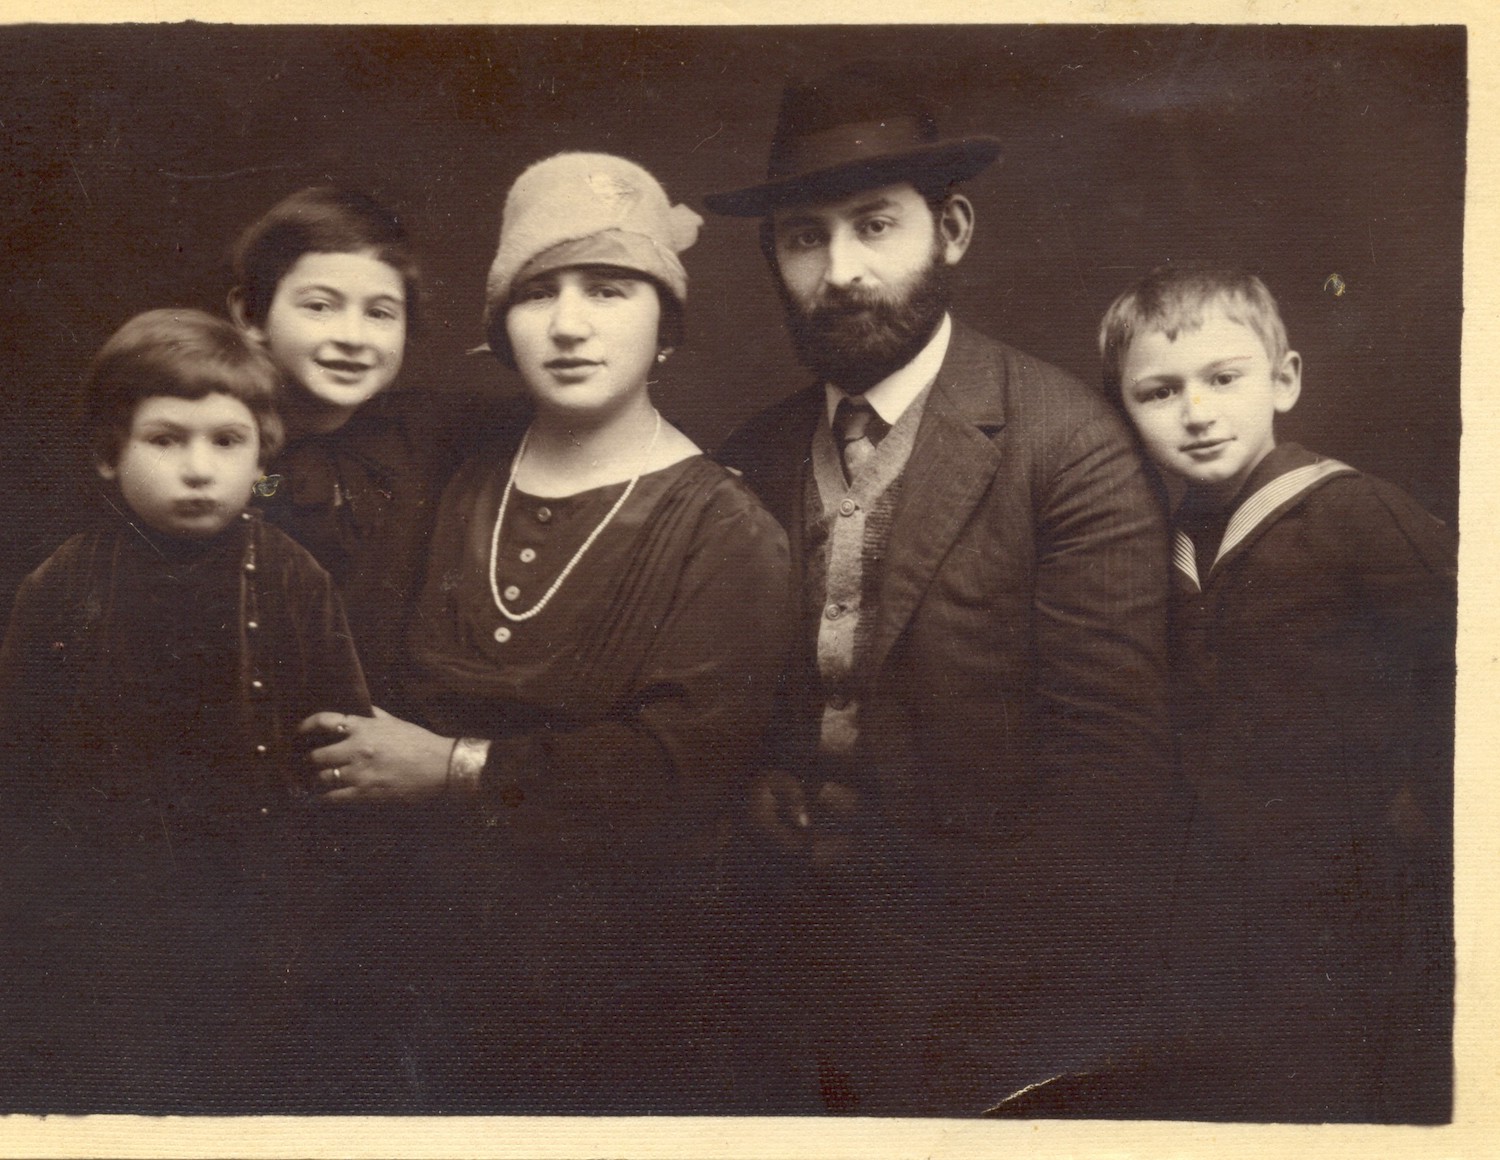 The Bruckstein family in 1925. Image: Family Archive